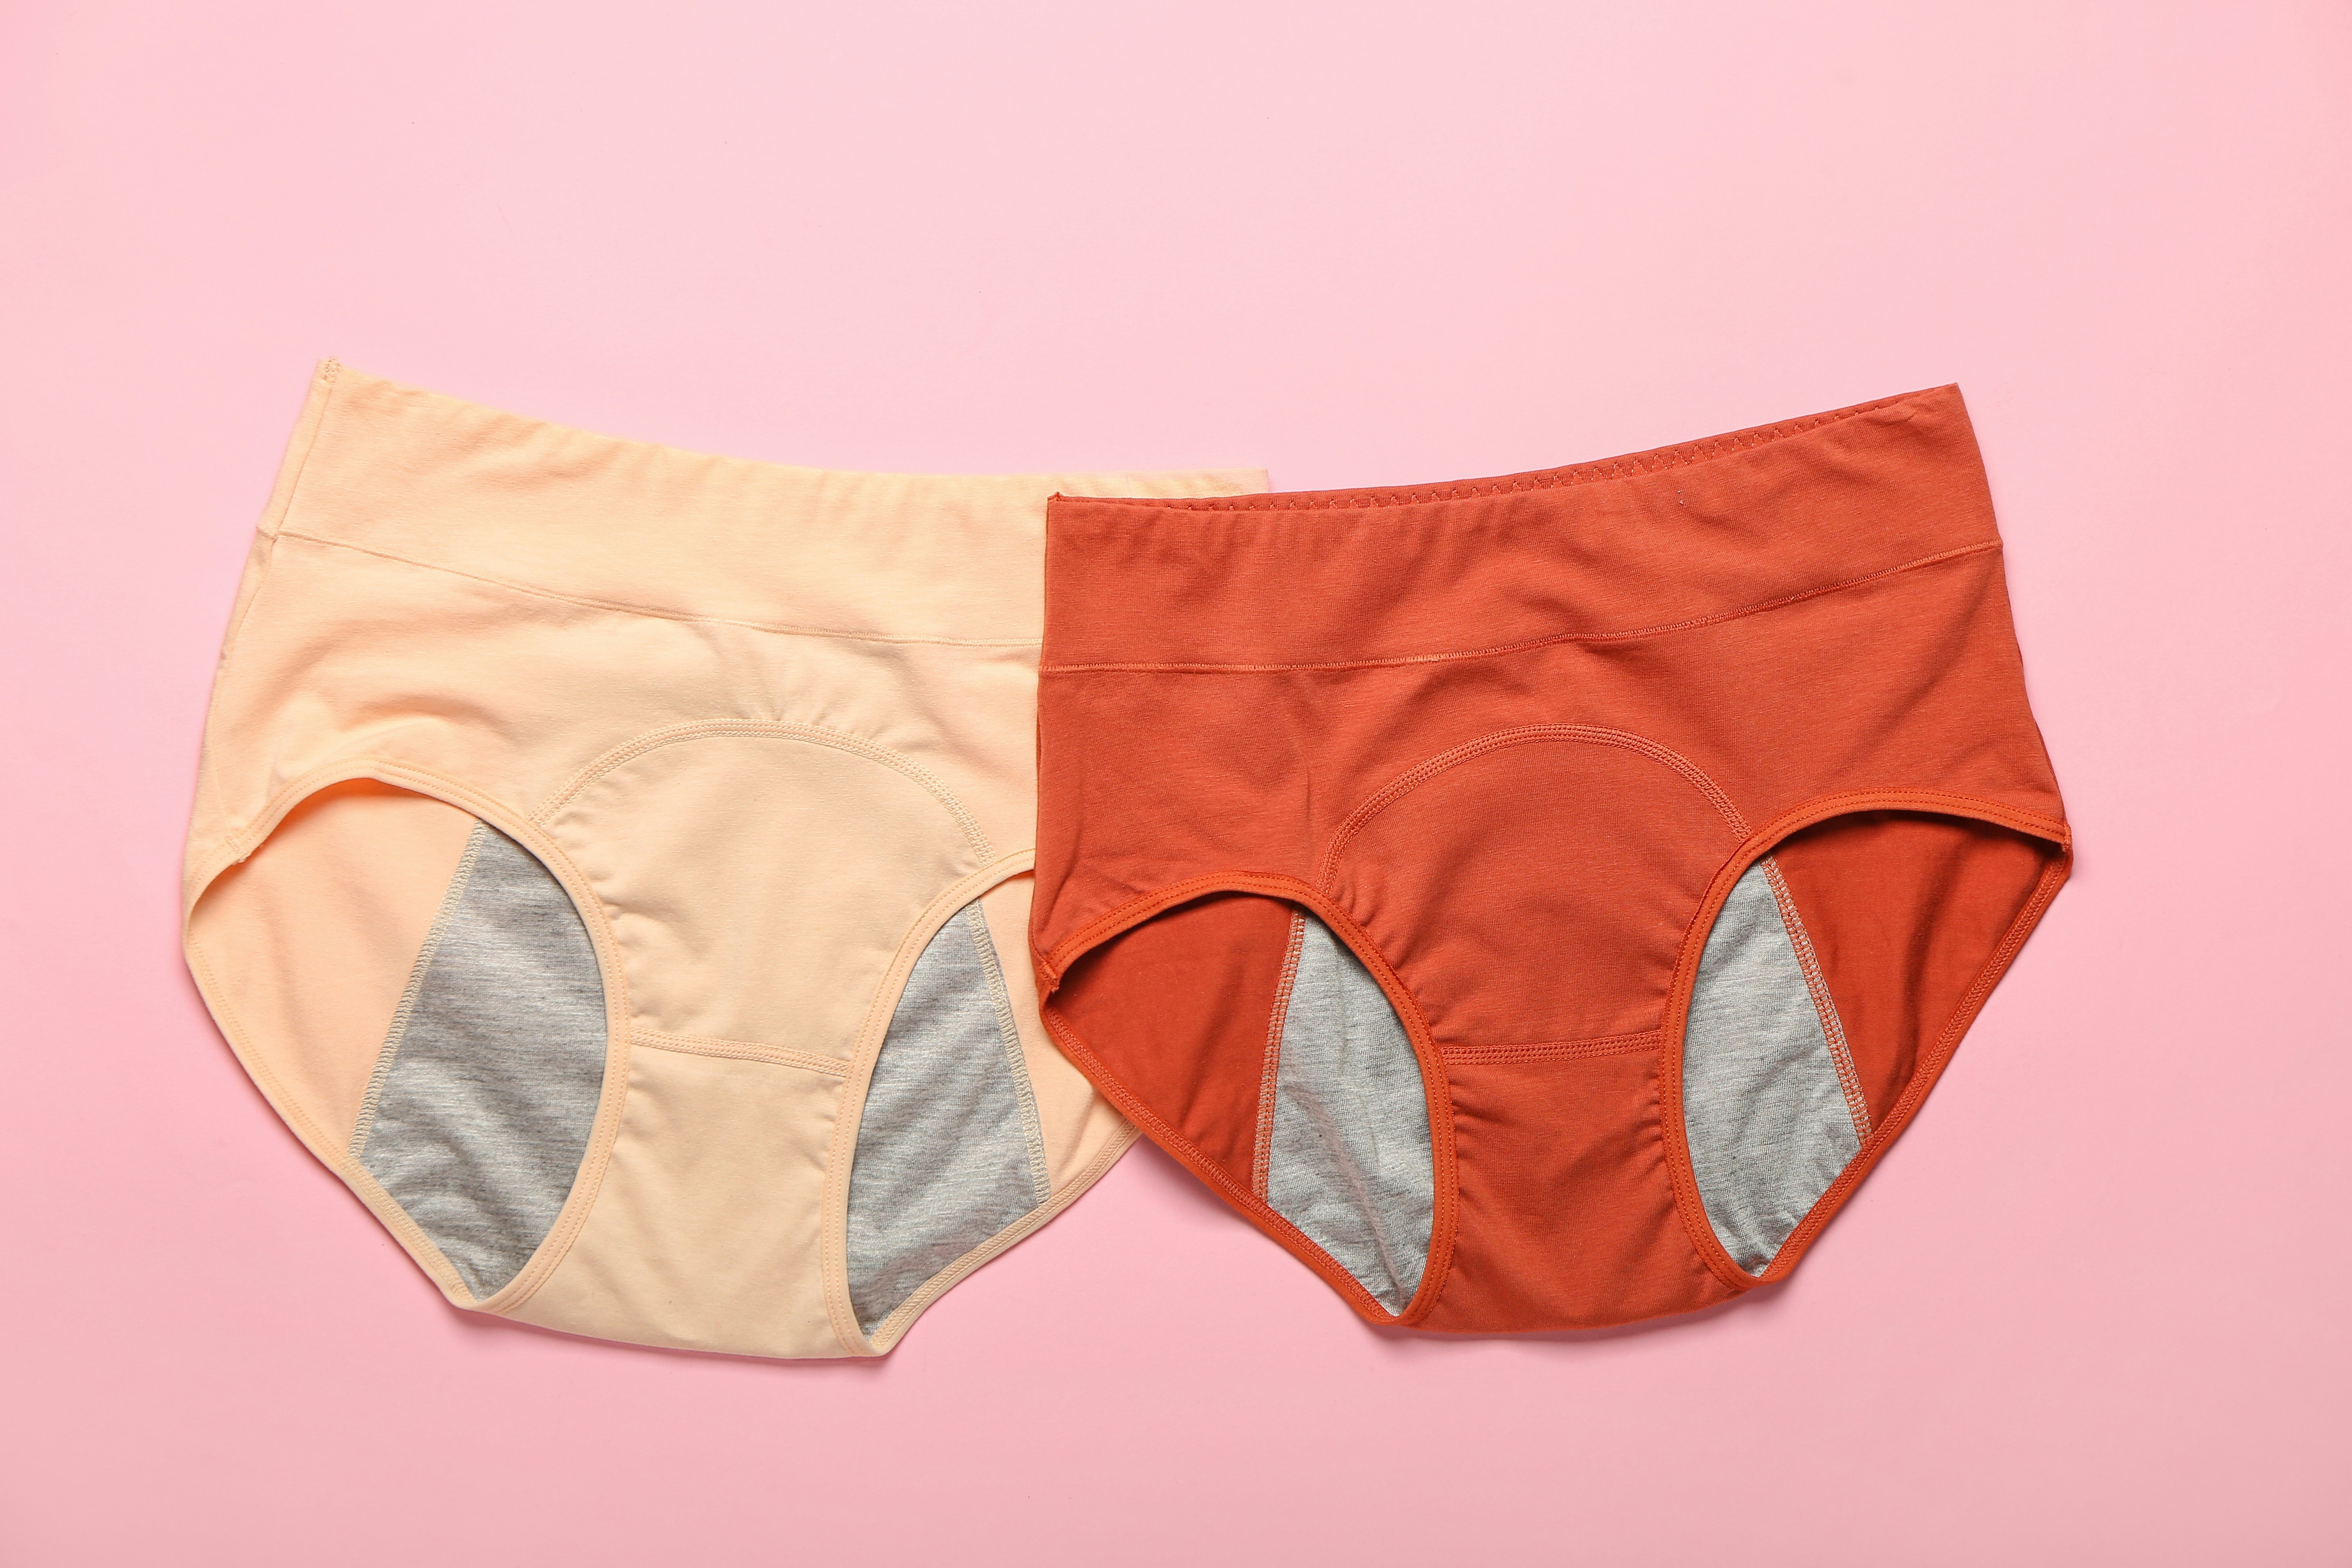 Period underwear for endometriosis: alternative to tampons, pads